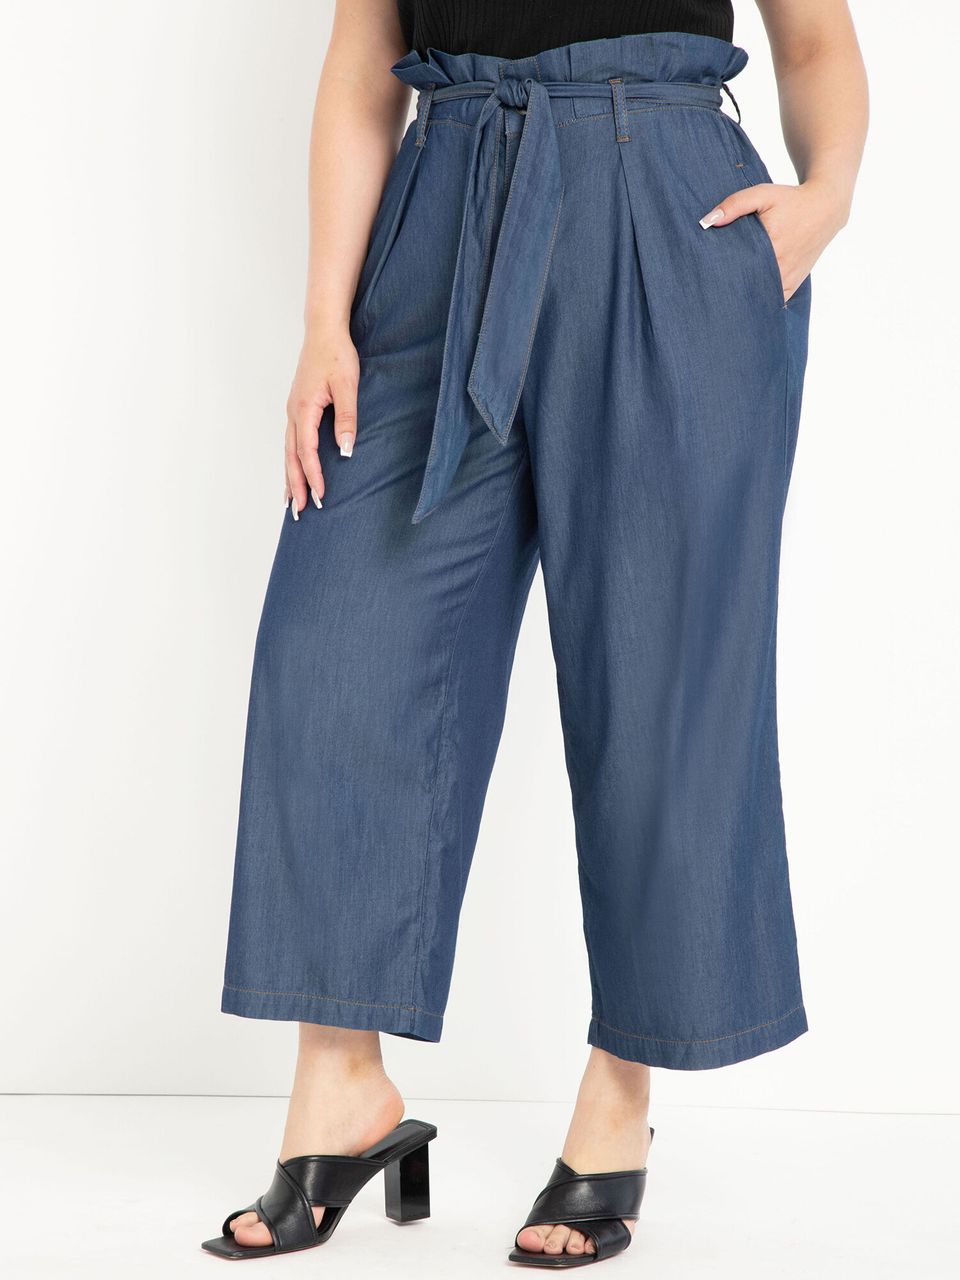 Walmart And ELOQUII Just Launched An Affordable New Plus-Size Line ...